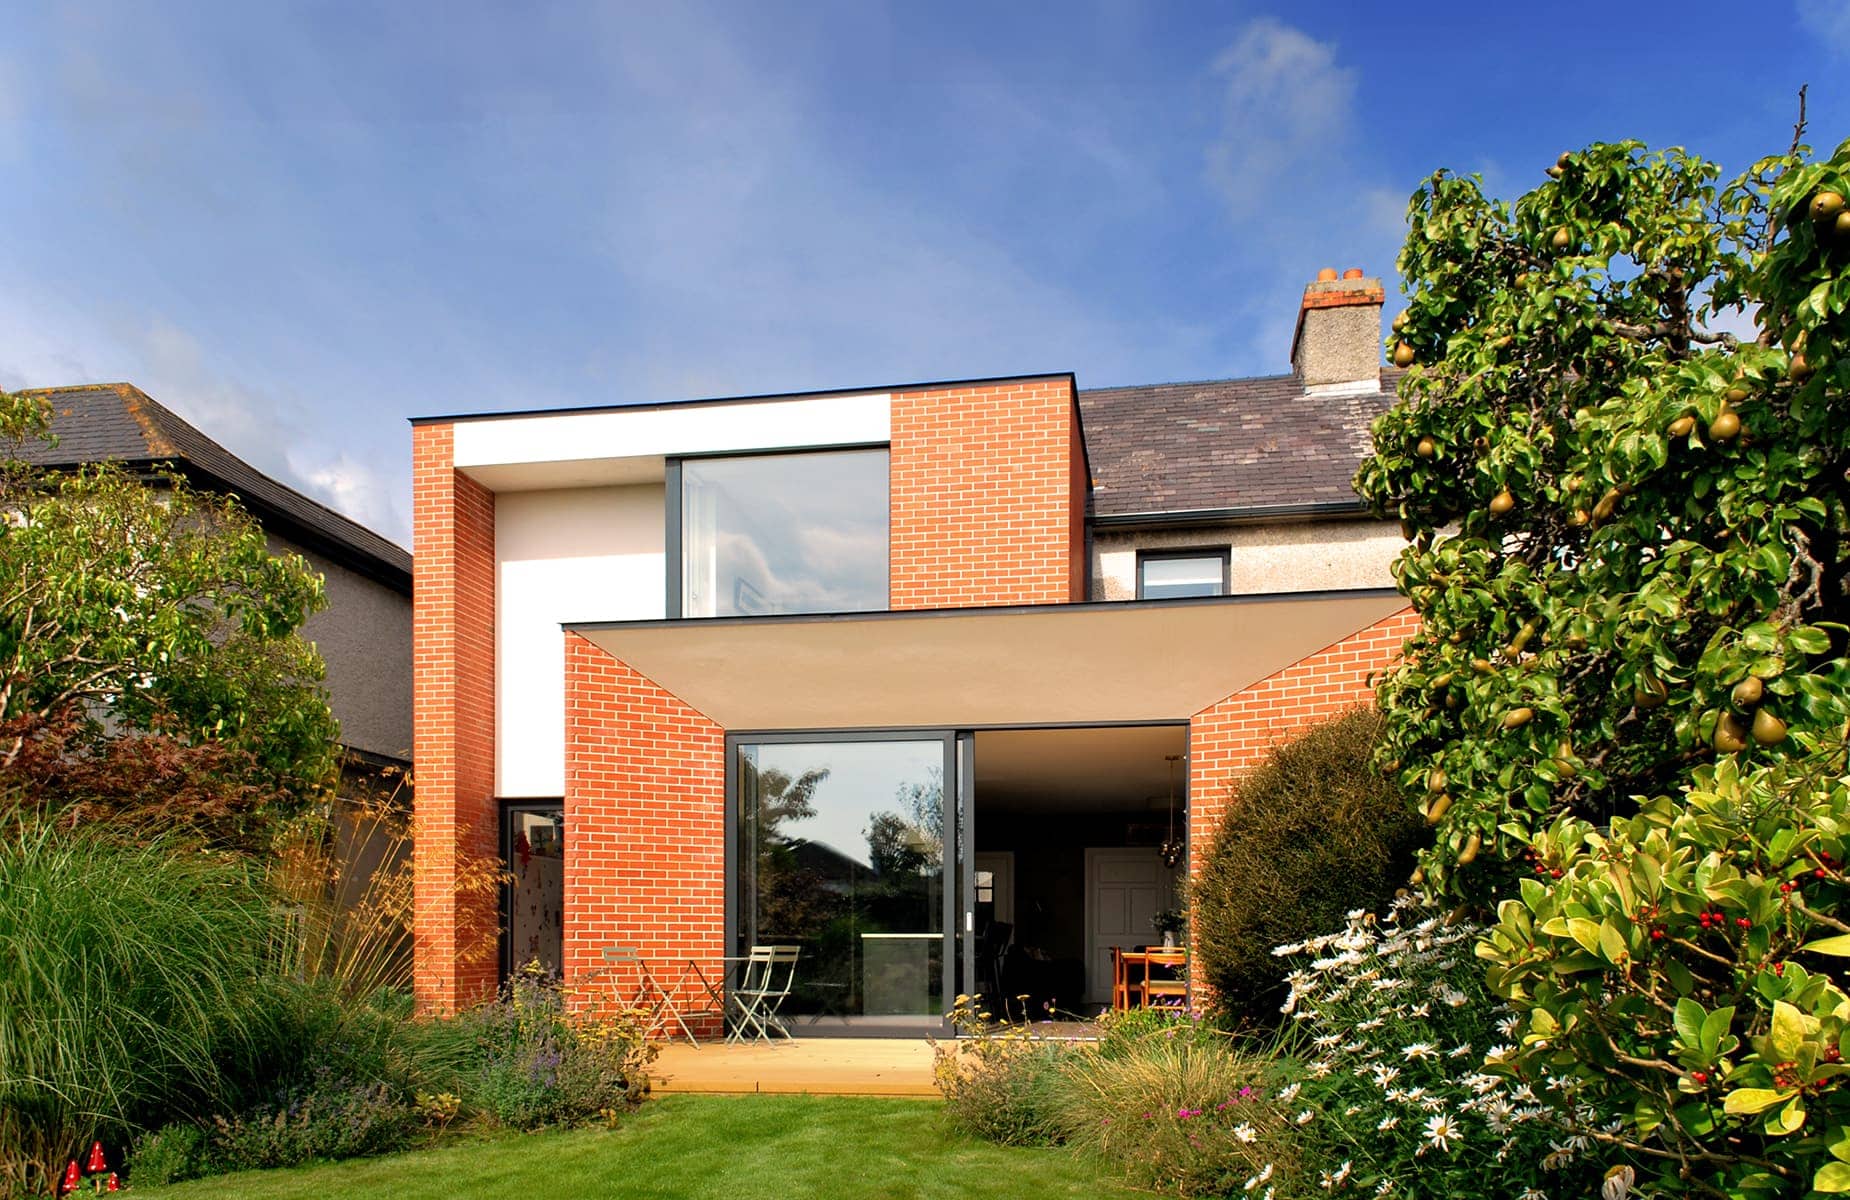 A beautiful modern house in Dublin, designed by architects, with a brick exterior and a lush garden